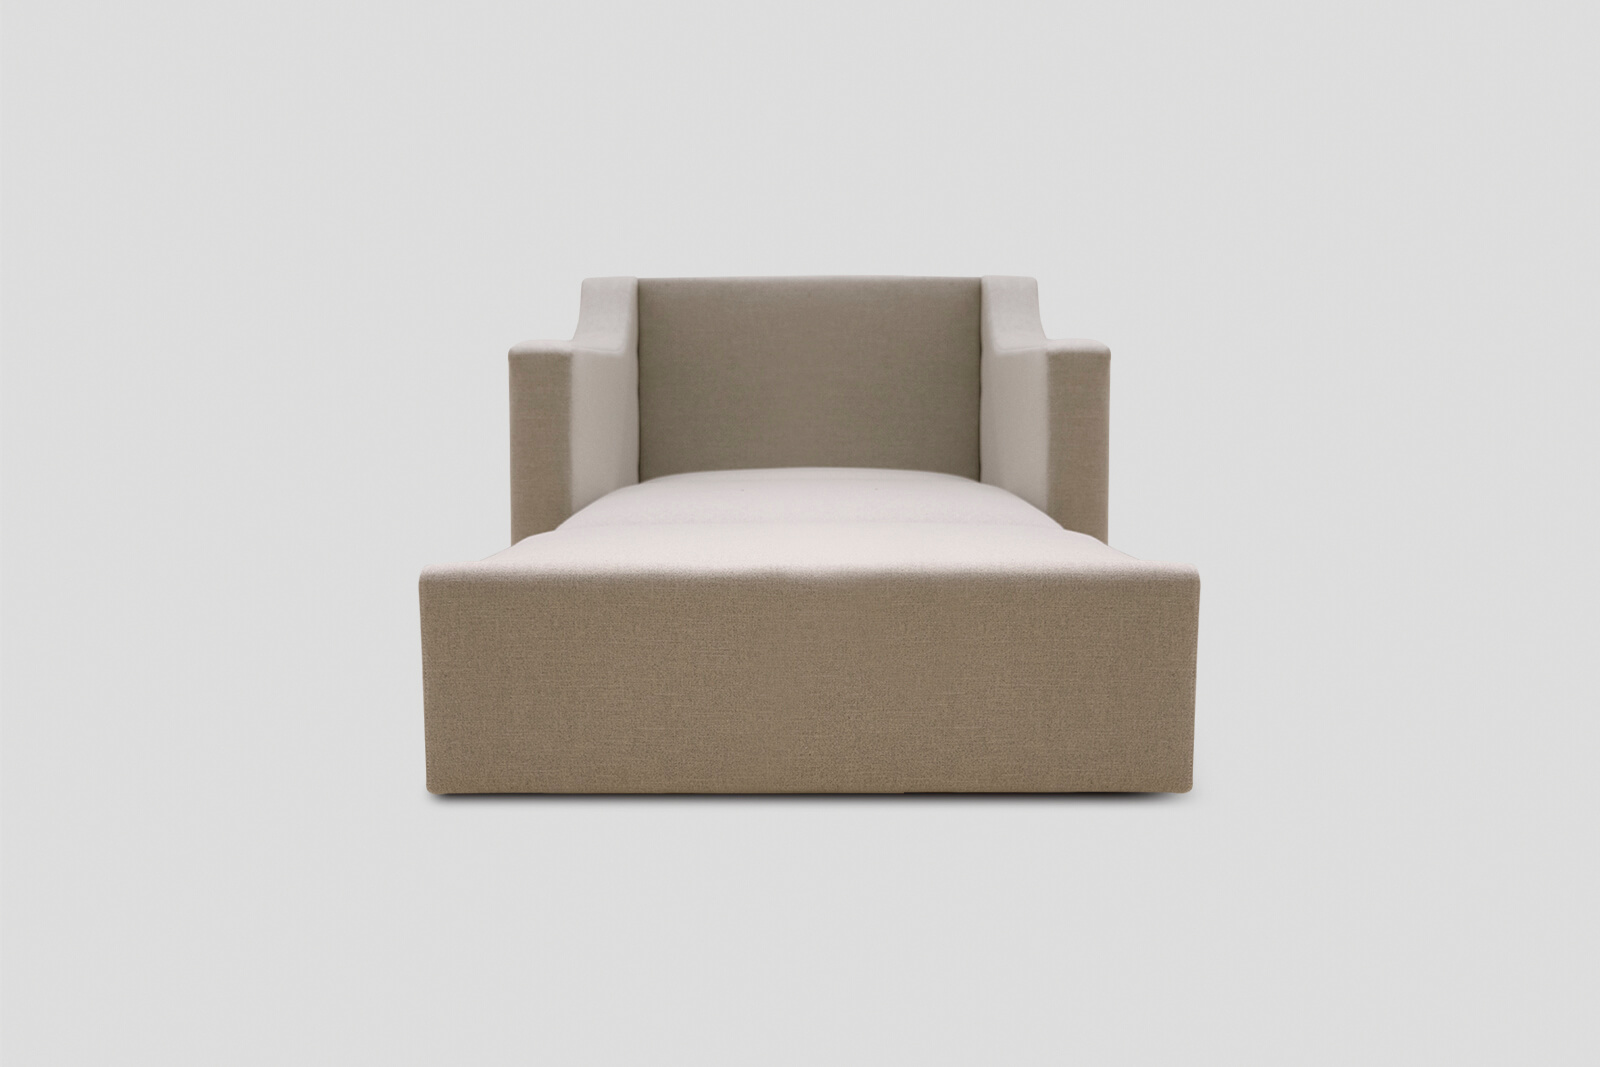 HBSB02-single-sofa-bed-coconut-bed-front